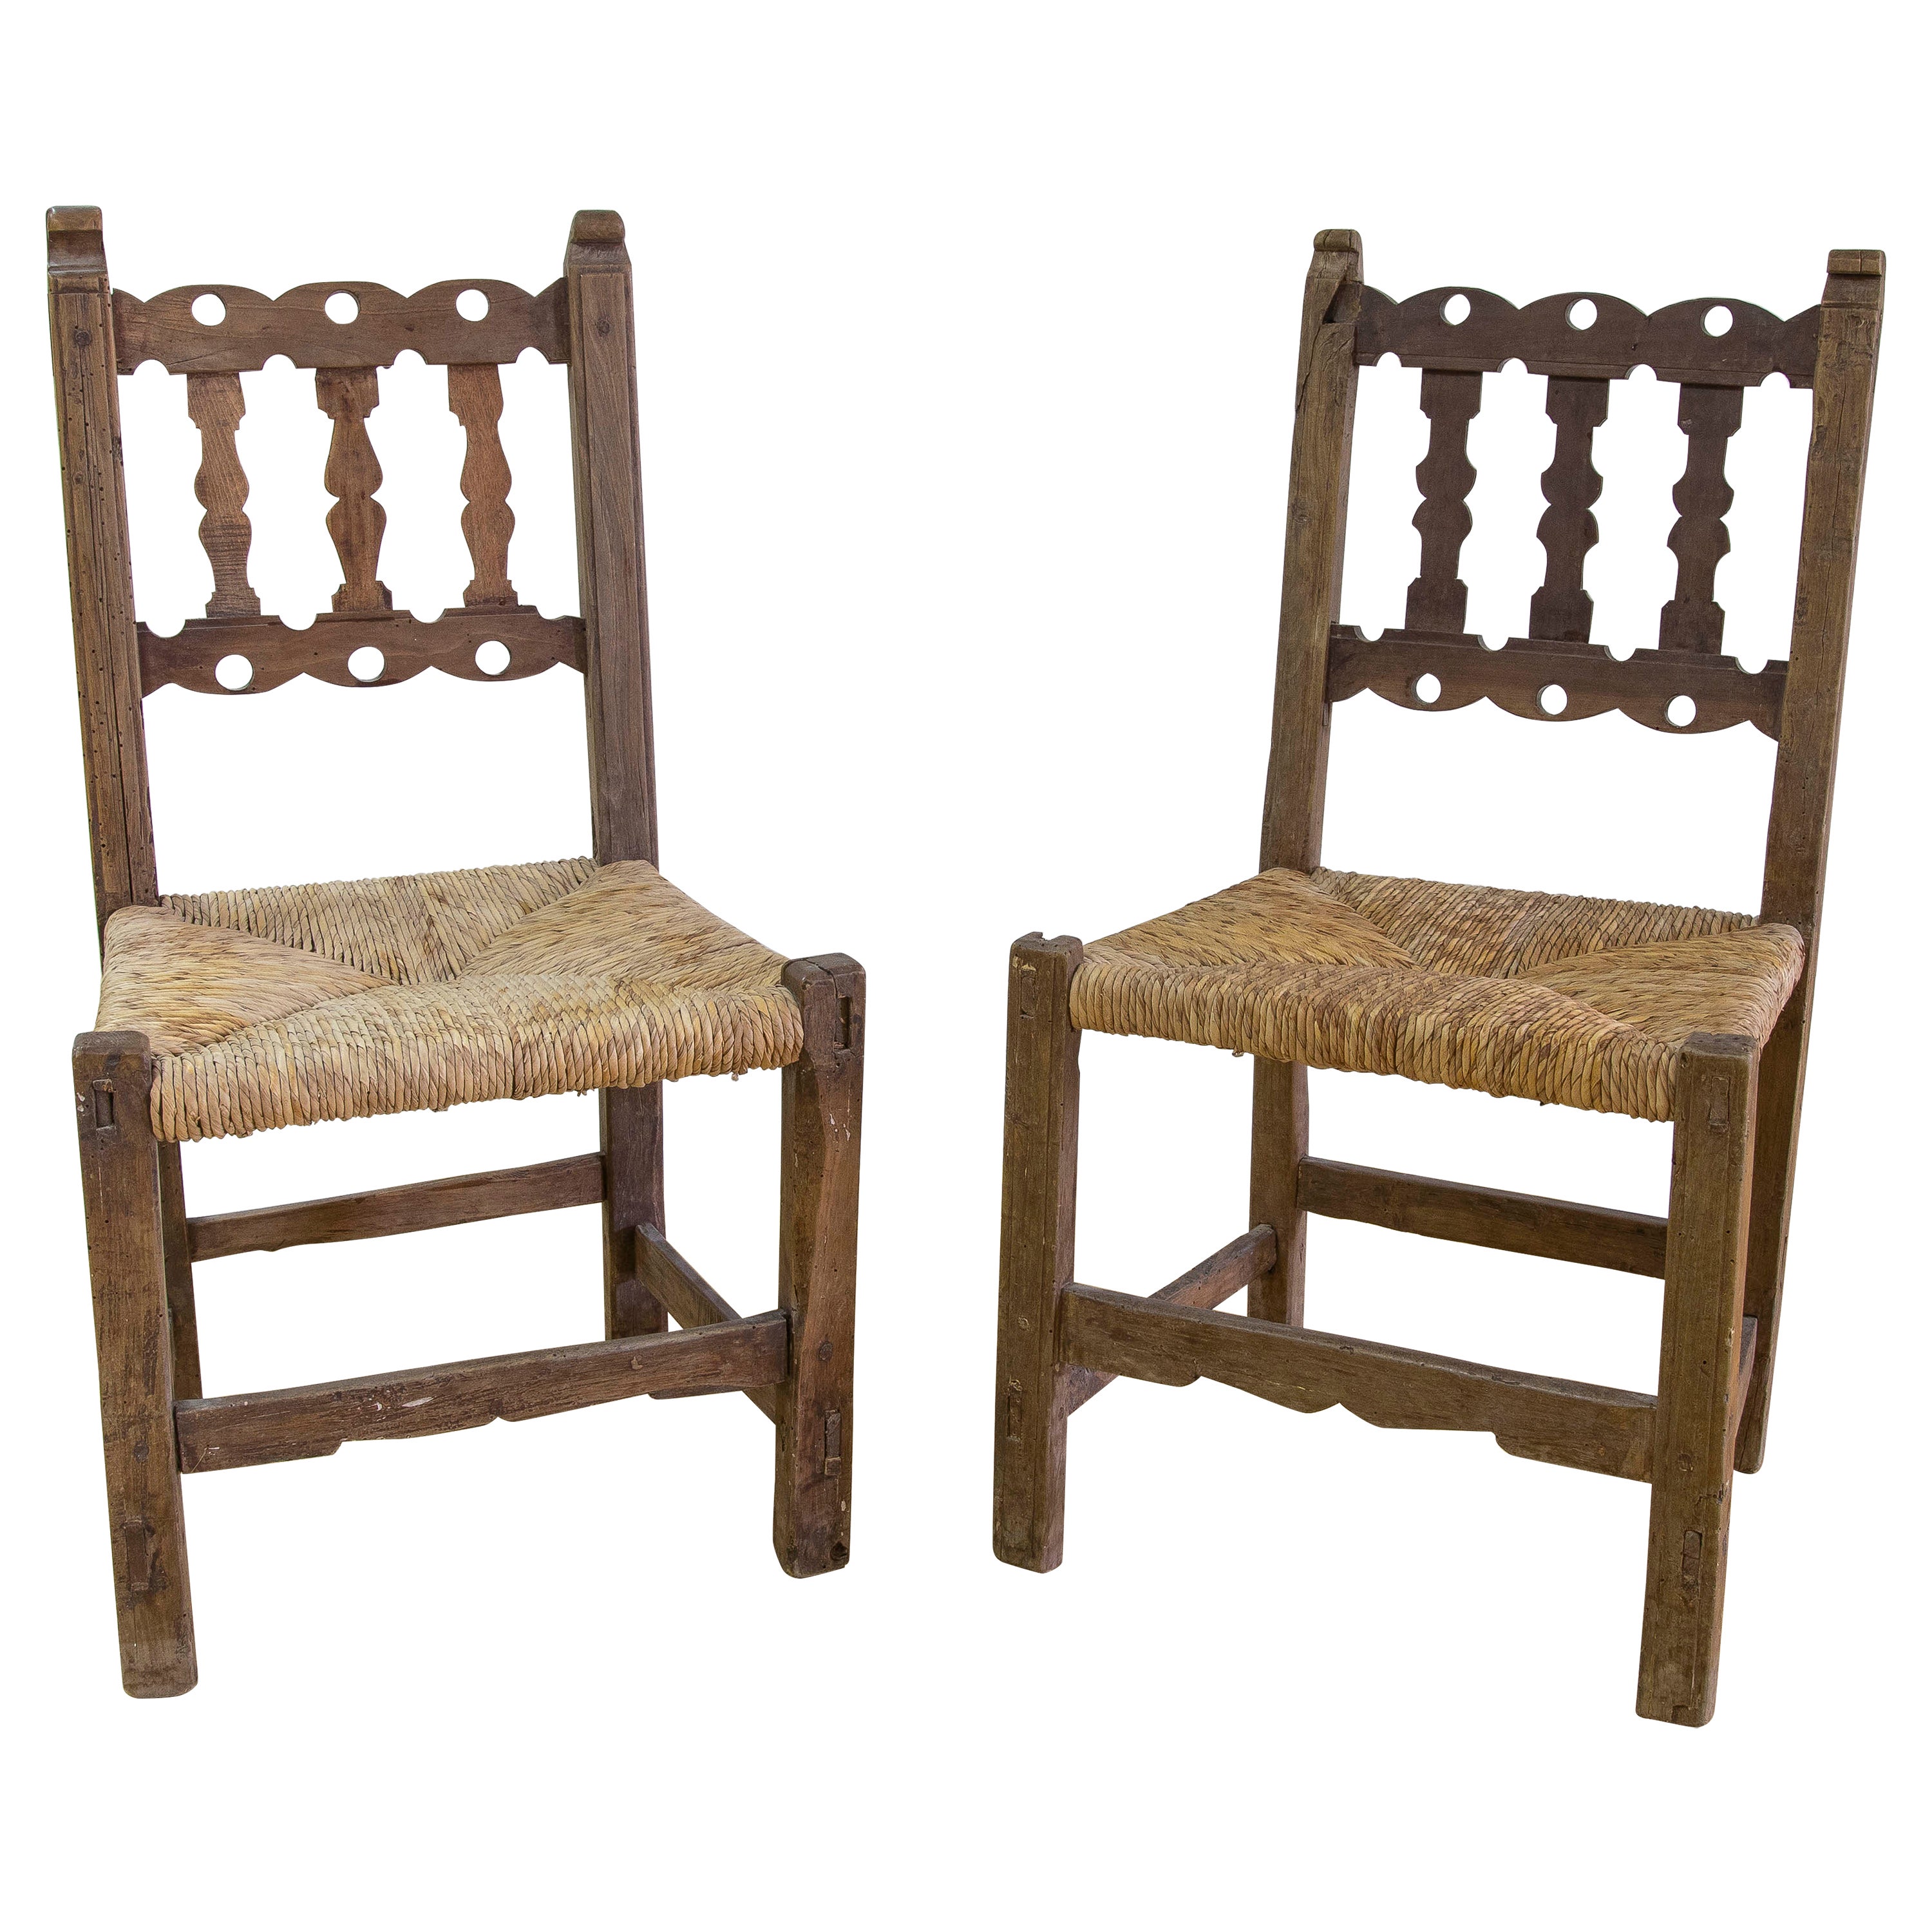 19th Century Spanish Pair of Olive Tree Chairs with Bulrush Seats